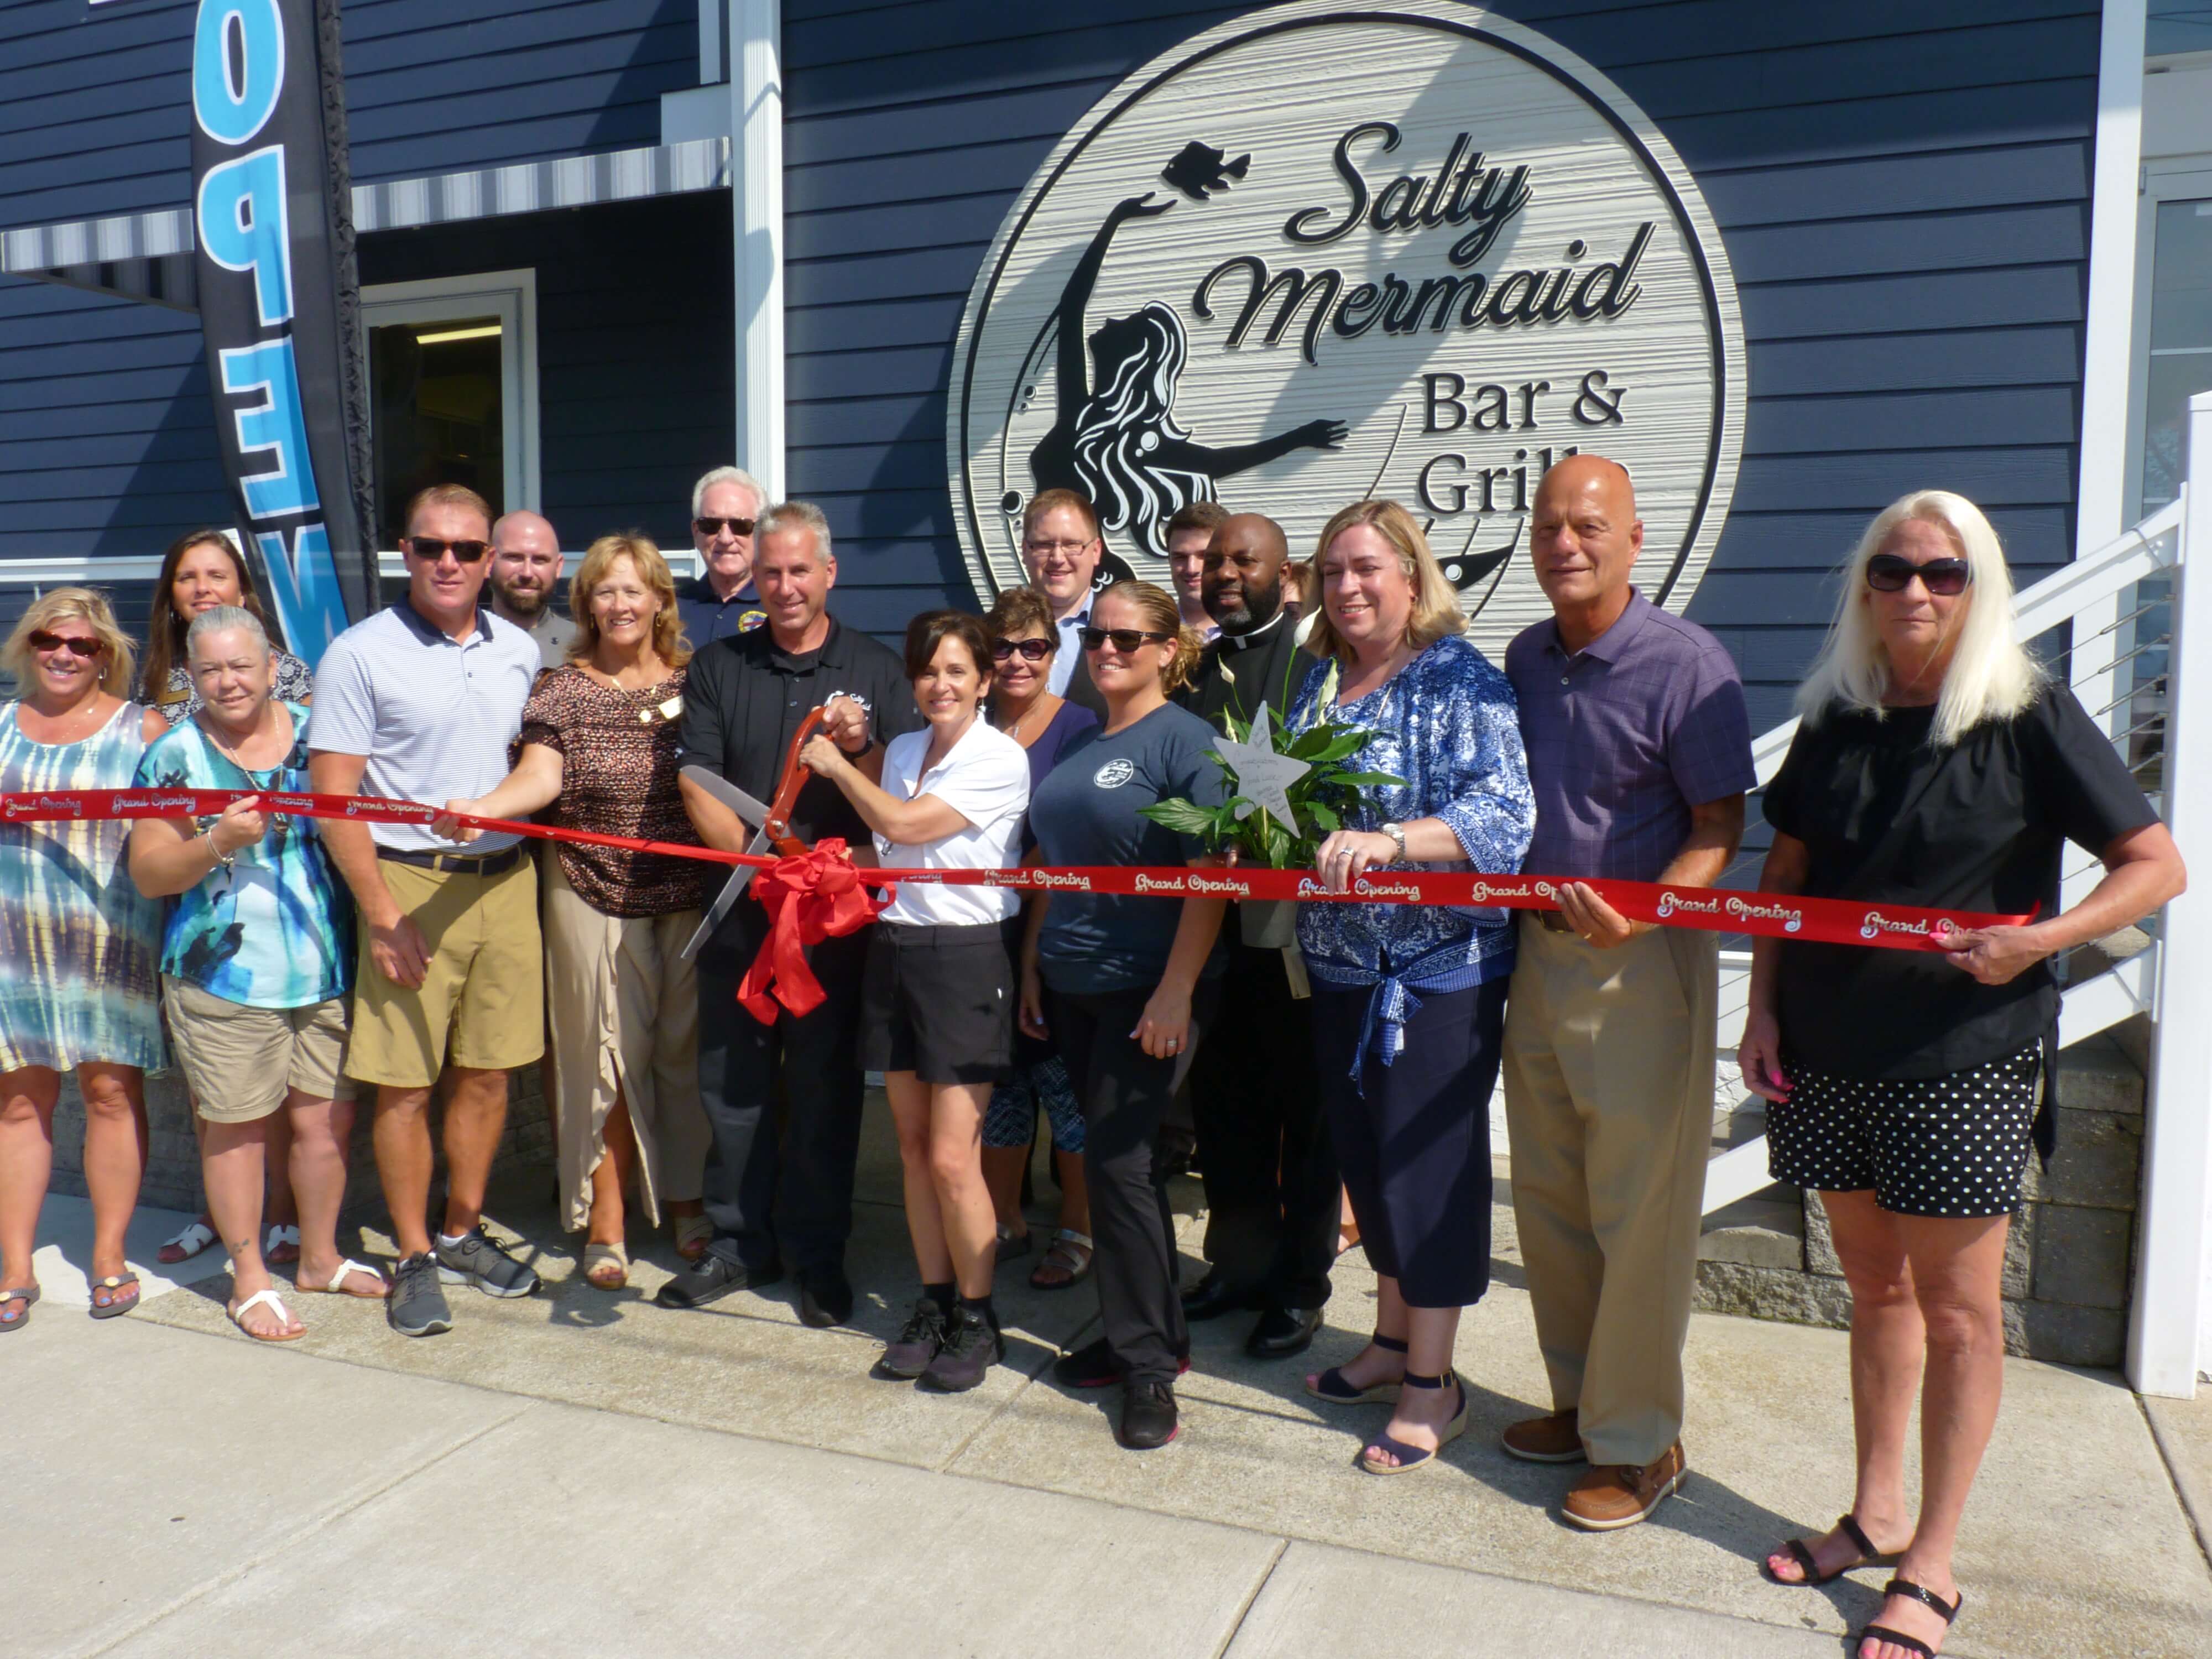 Salty Mermaid Bar & Grille in North Wildwood Holds Grand Opening Ribbon Cutting Ceremony